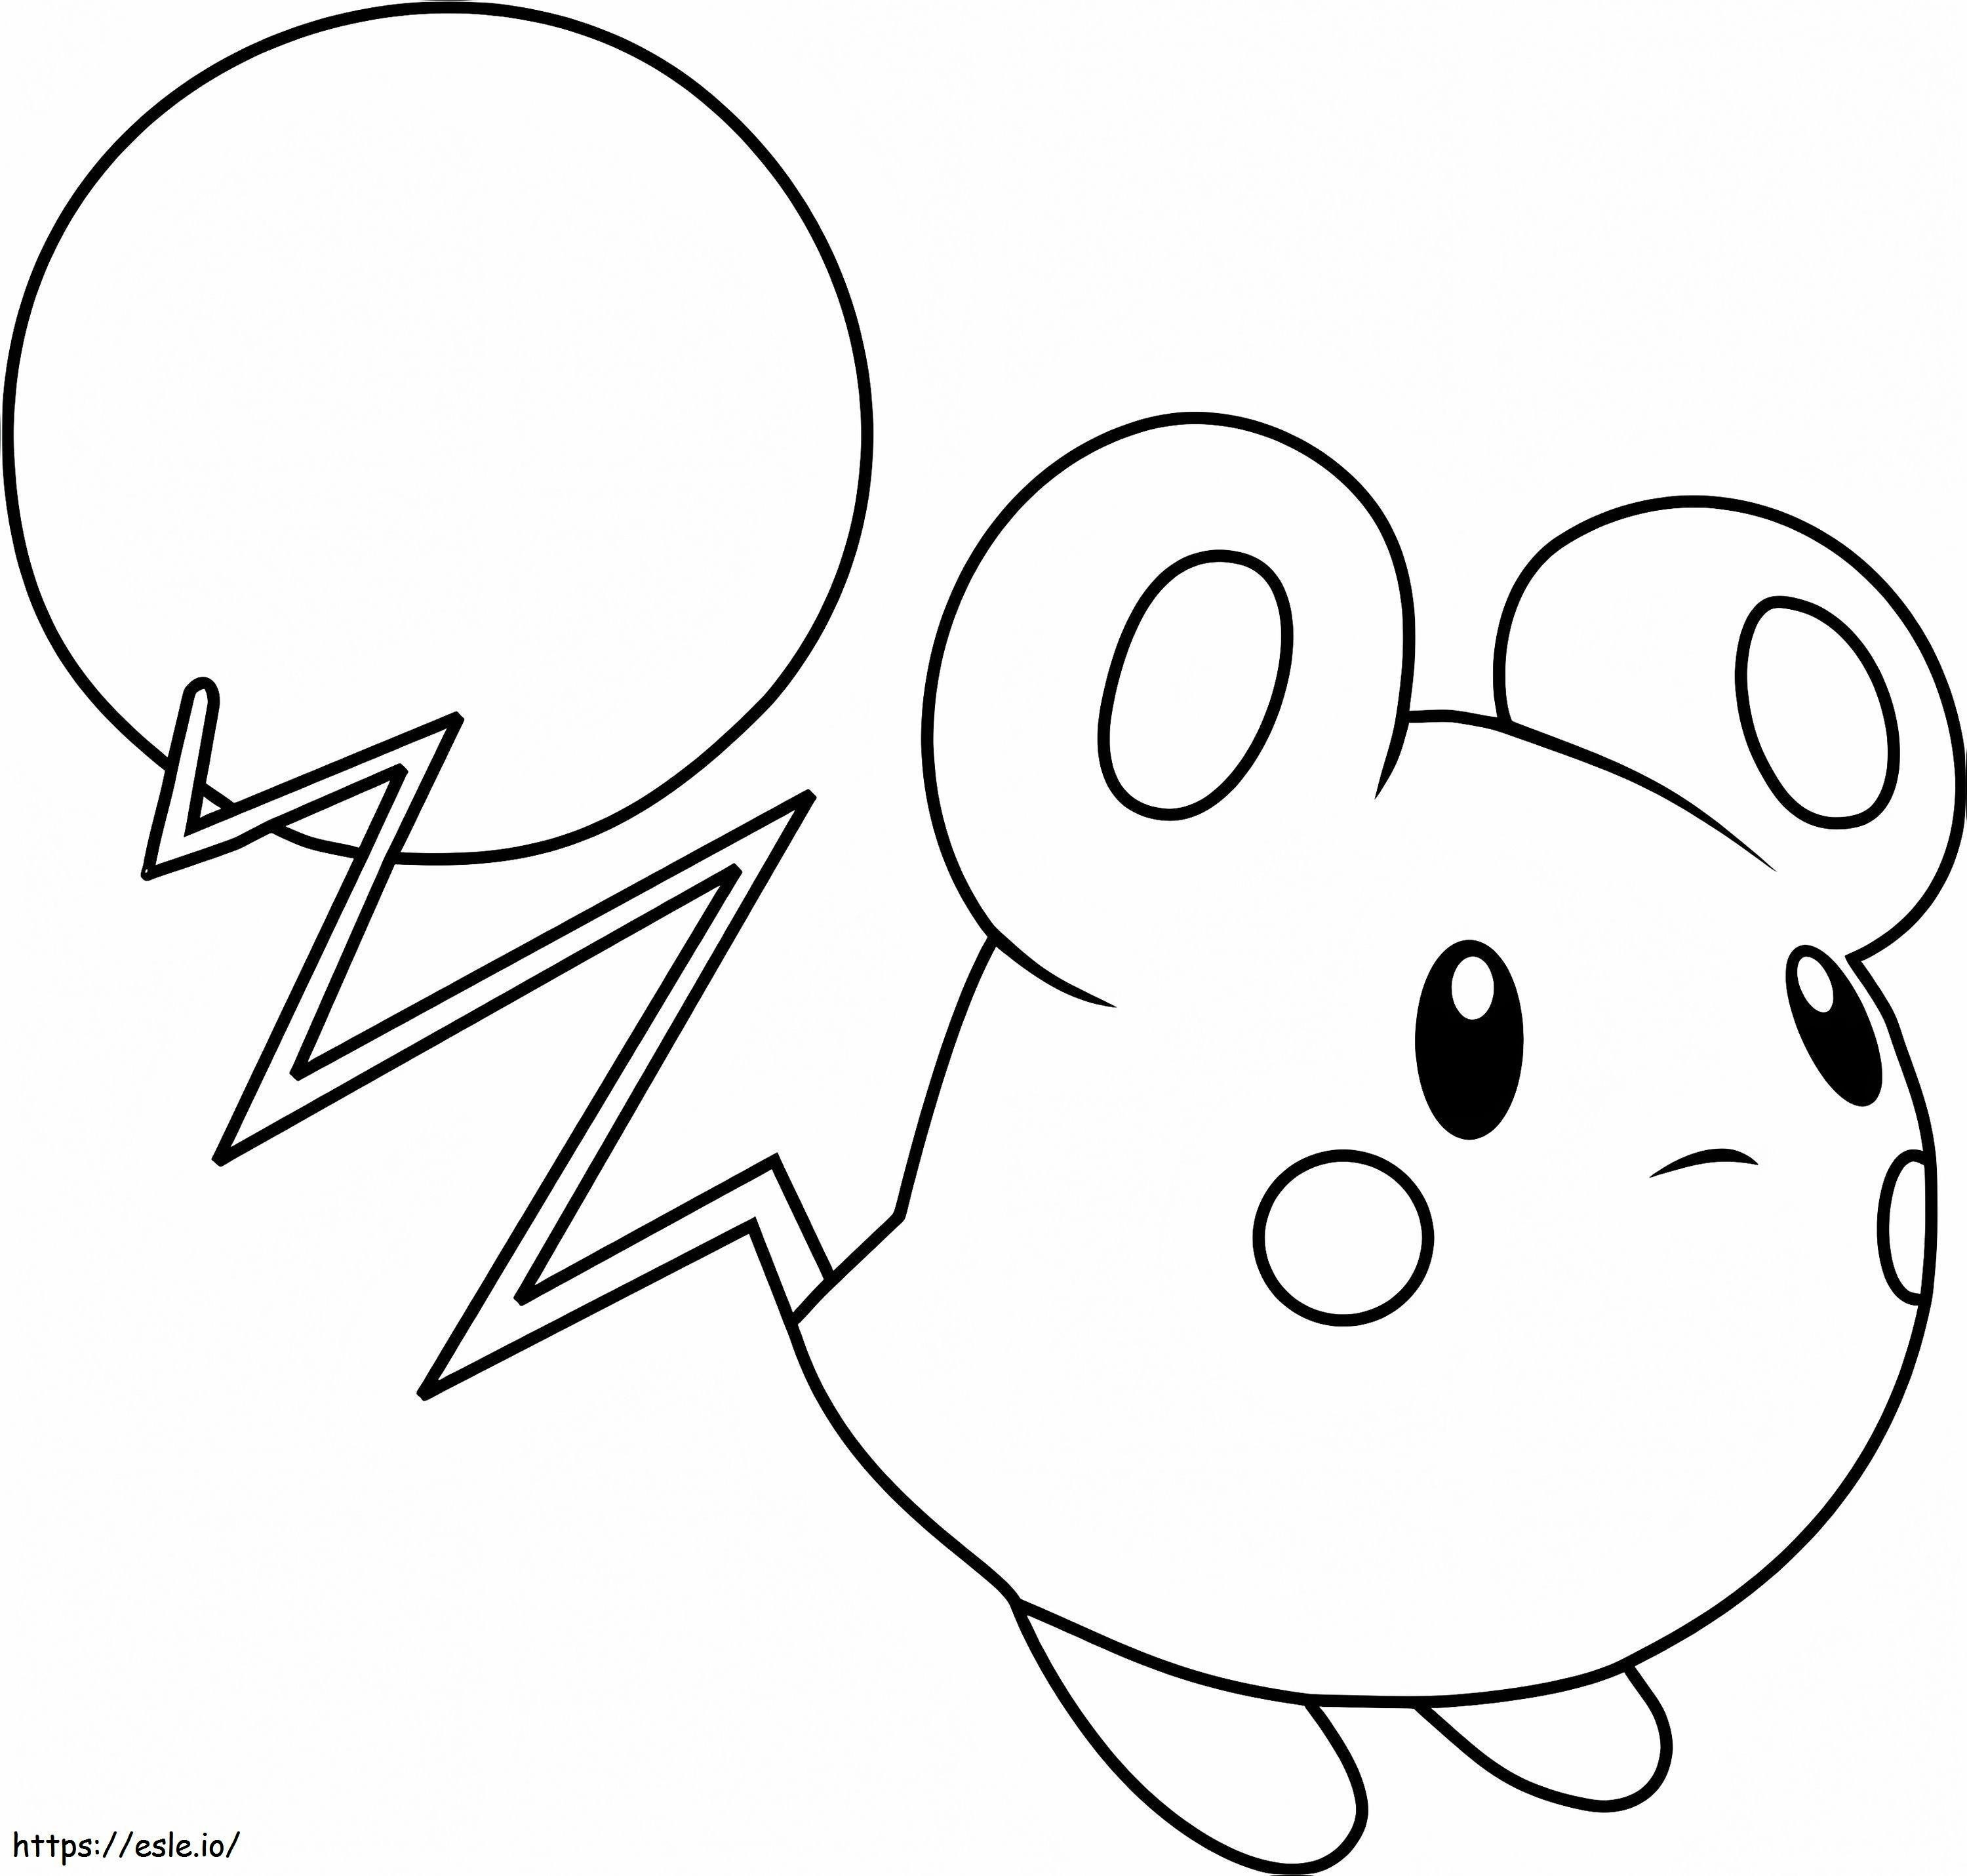 Marill 5 coloring page